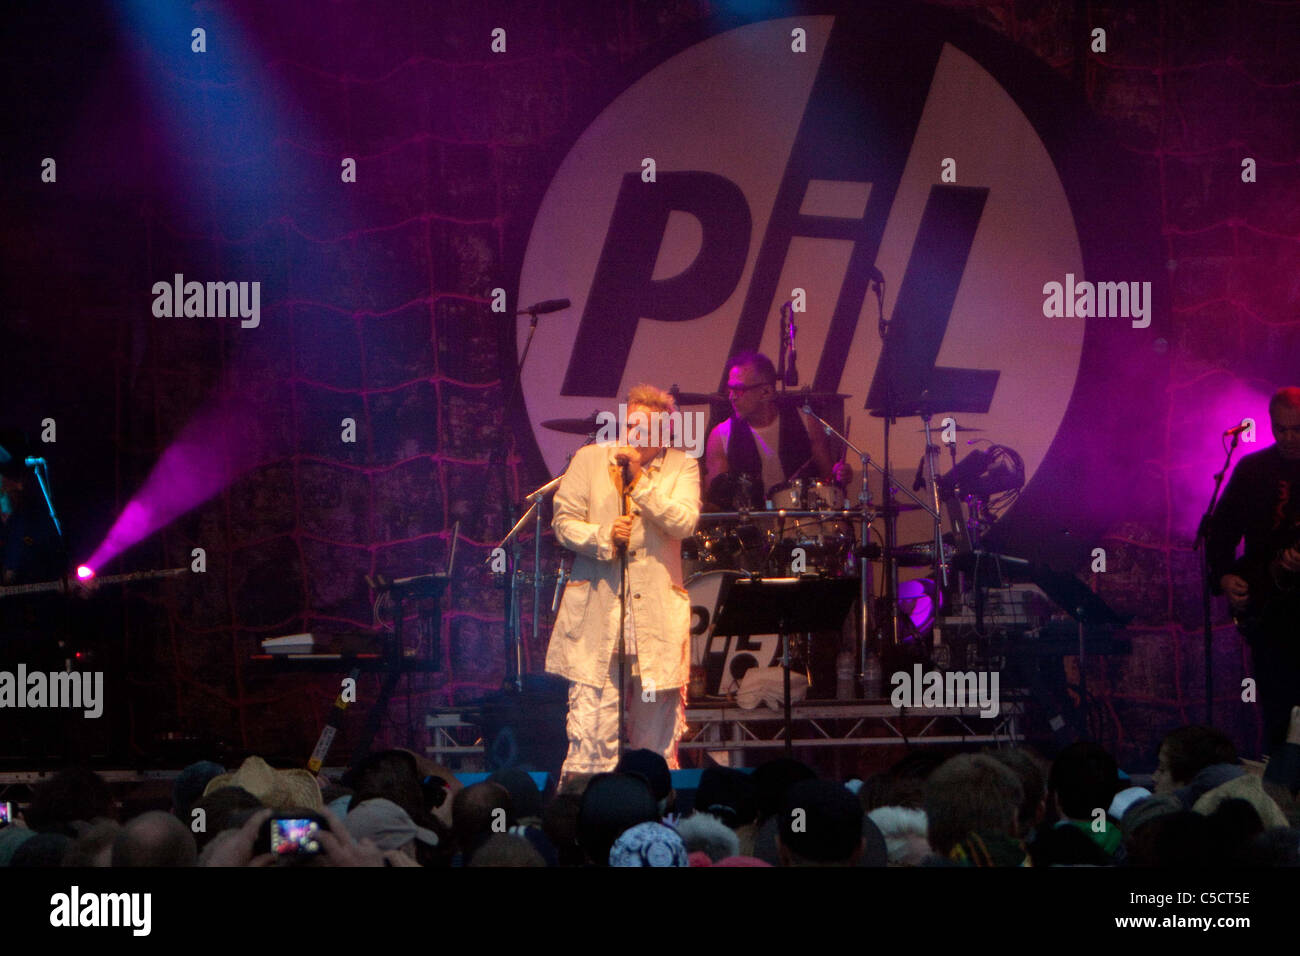 Public Image Limited (PIL) performing at Guilfest 2011 Stock Photo